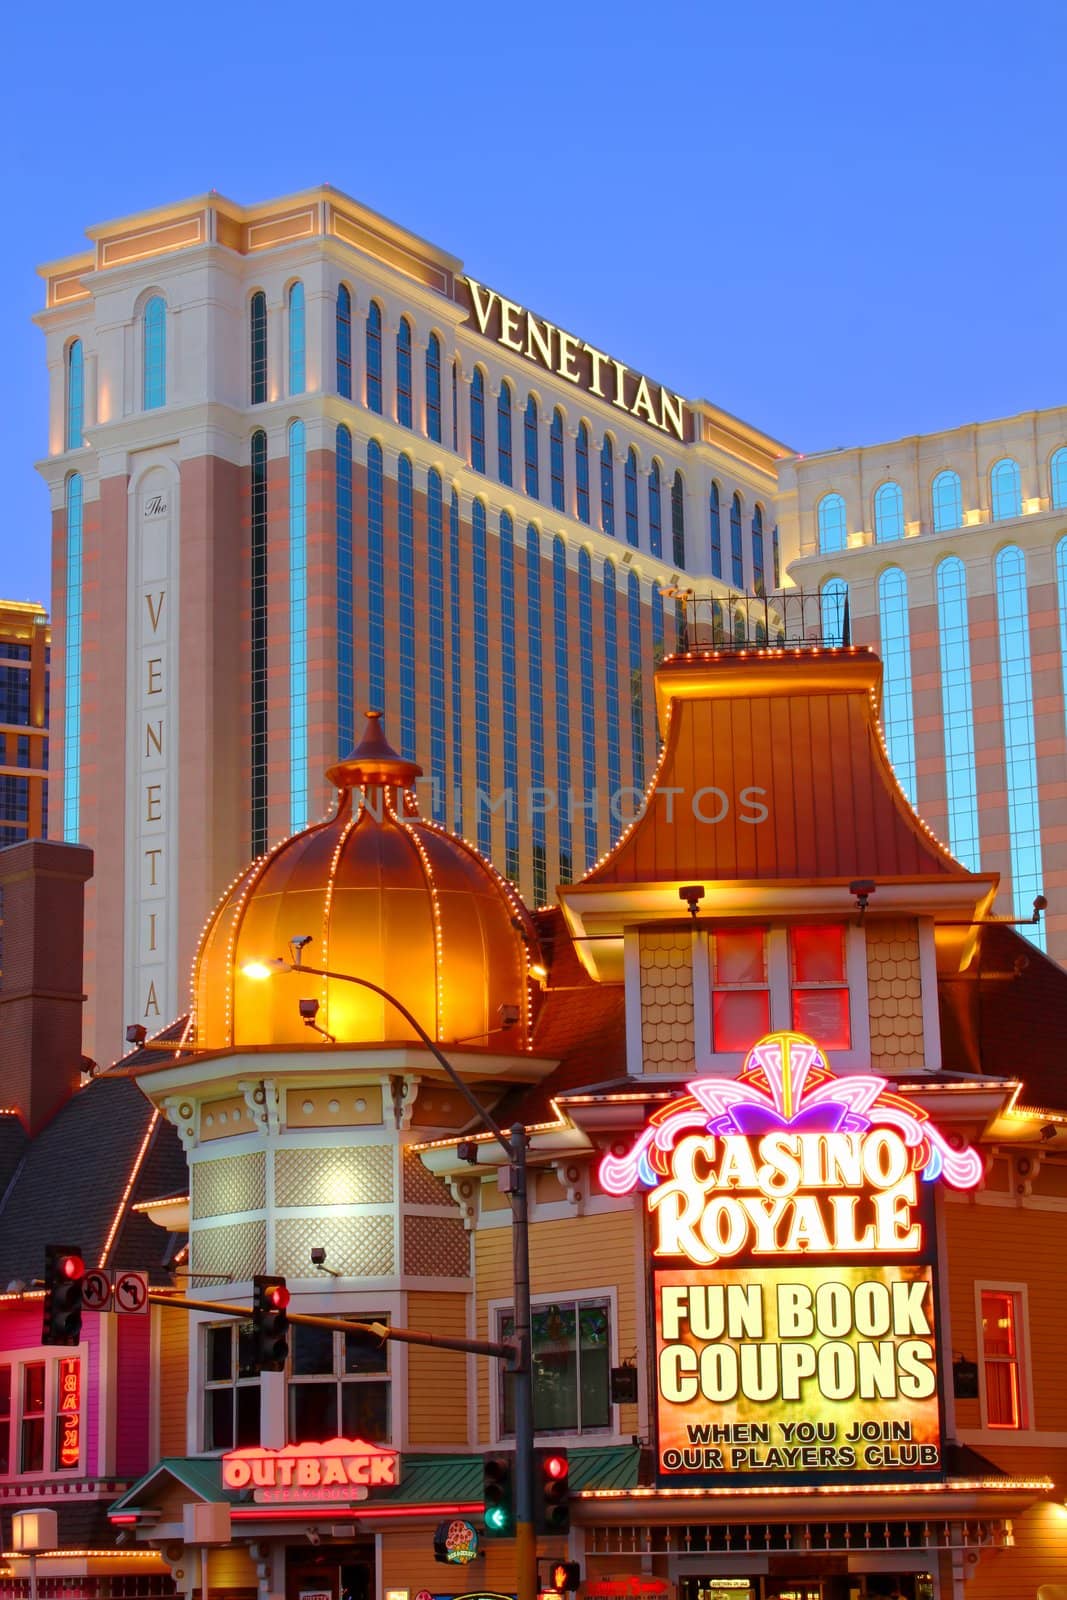 Las Vegas, USA - May 22, 2012: The Venetian Resort Hotel Casino is located in Las Vegas, Nevada.  It was opened in 1999 and has over 4,000 hotel rooms available for guests.